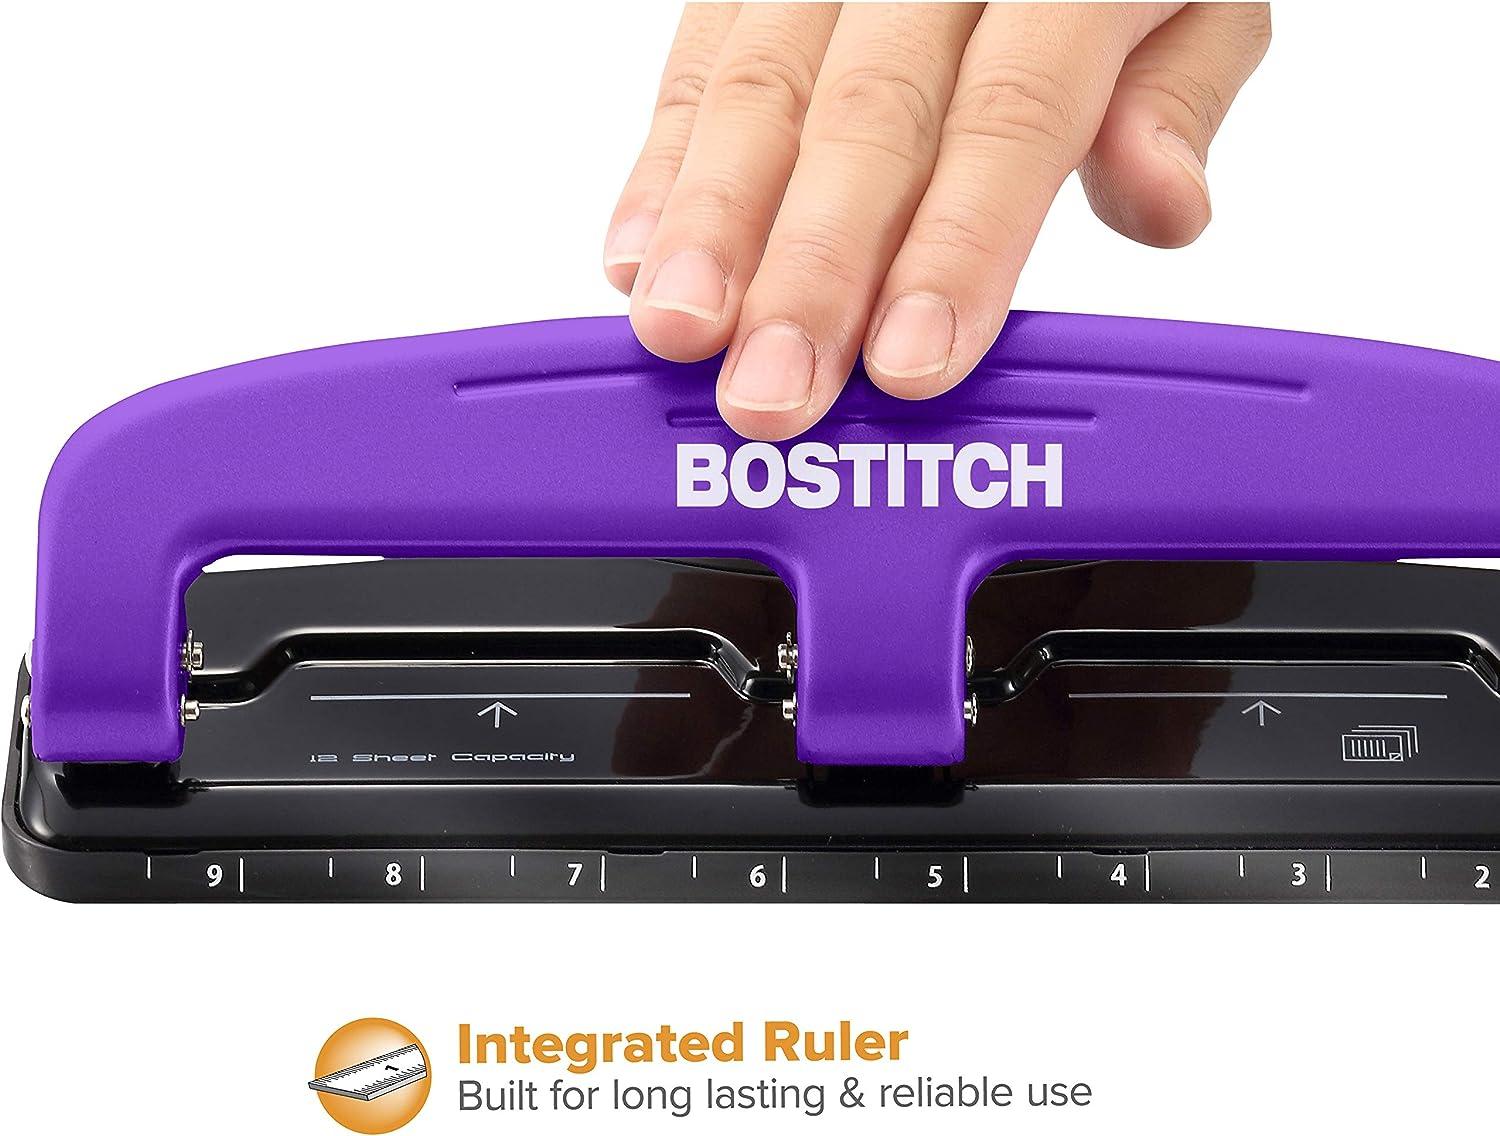  Bostitch Office Premium 3 Hole Punch, 12 Sheet Capacity,  Metal, Rubber Base, Easy-Clean Tray, Silver : Arts, Crafts & Sewing